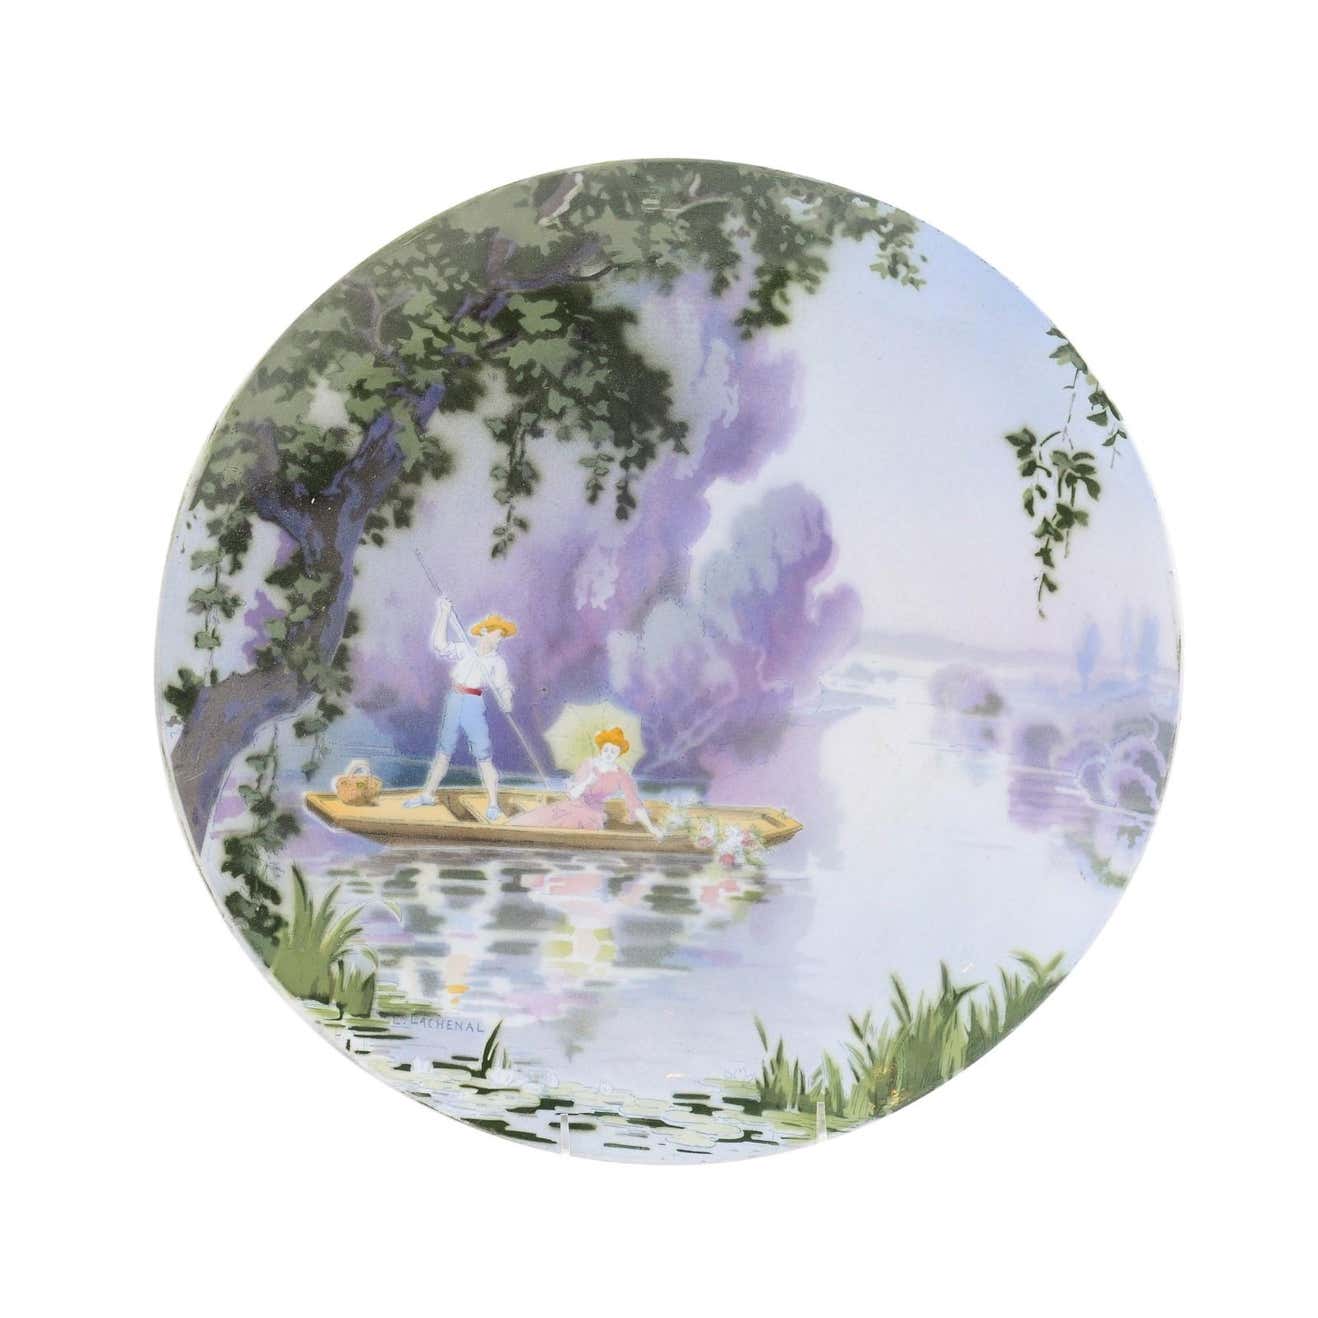 ON HOLD - French Late 19th Century Porcelain Decorative Hanging Plate by Edmond Lachenal